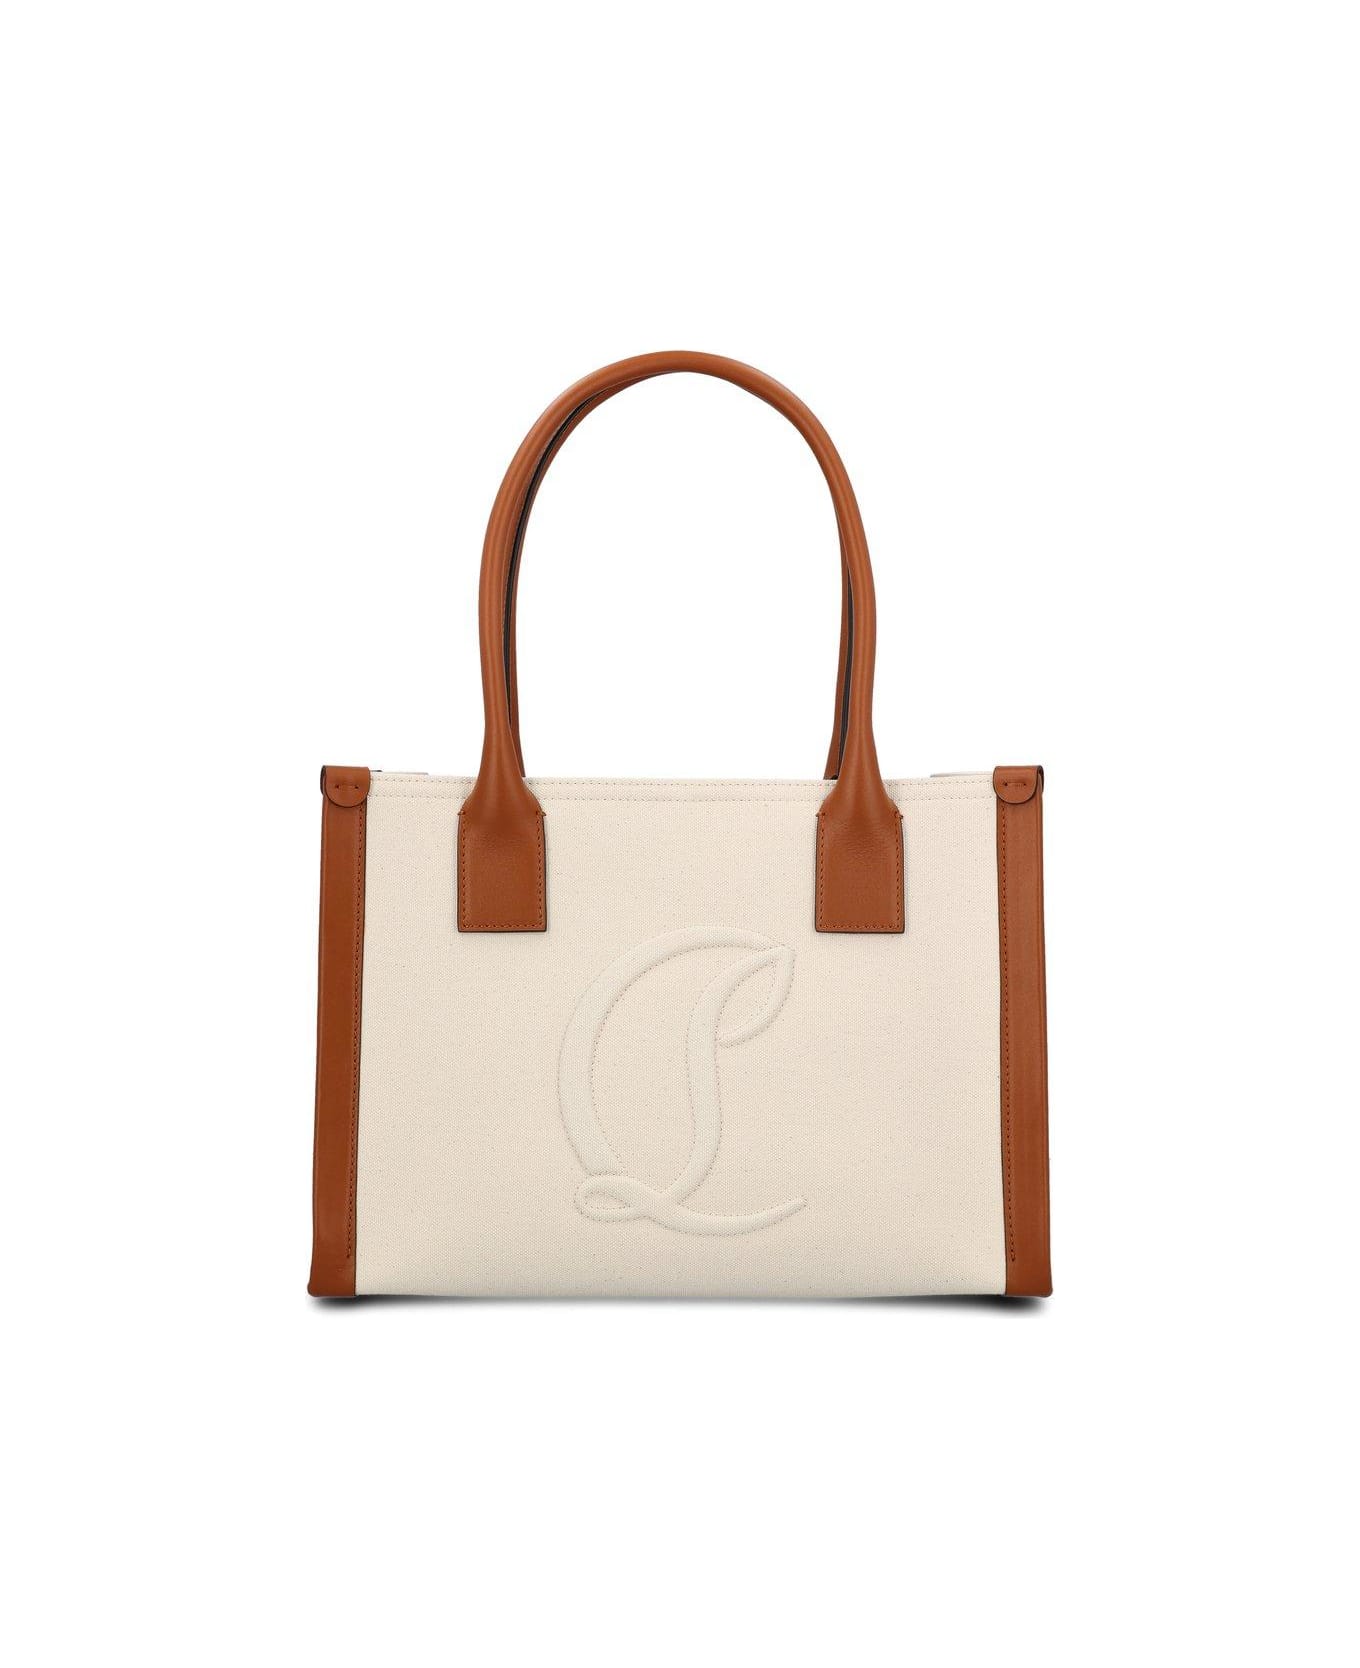 Christian Louboutin By My Side Small Shoulder Bag - Natural/cuoio